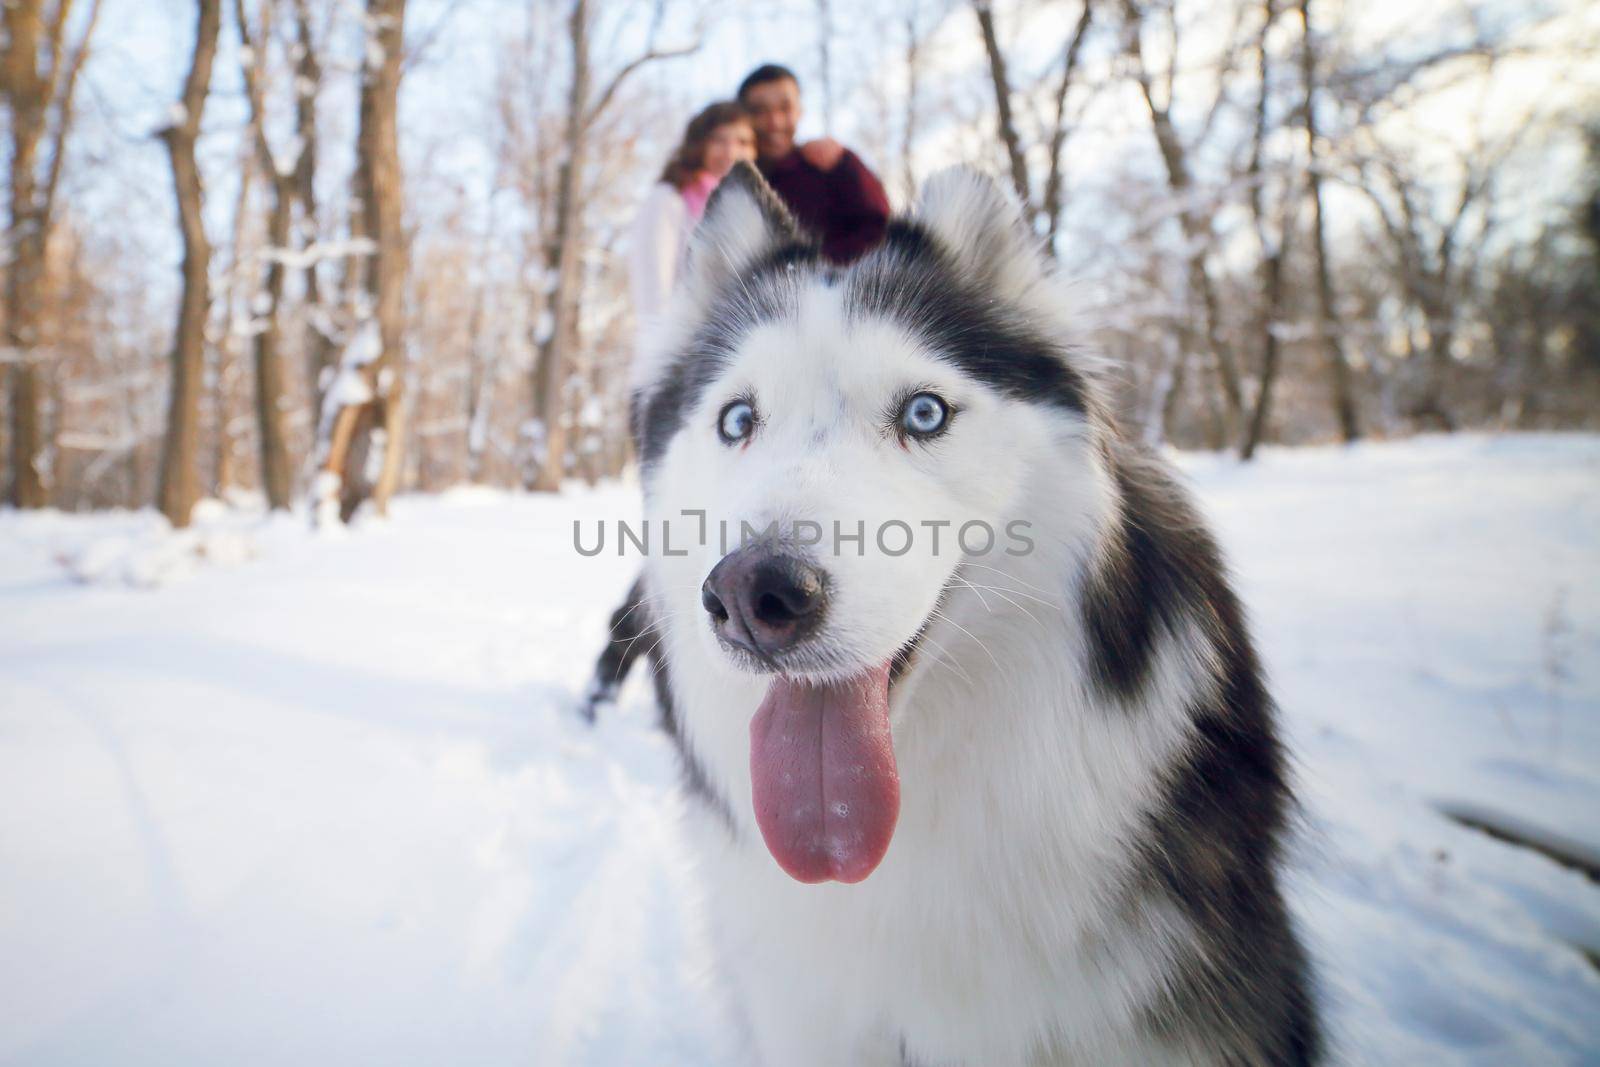 Cheerful muzzle of a dog husky in a winter park, in the background a young couple by selinsmo